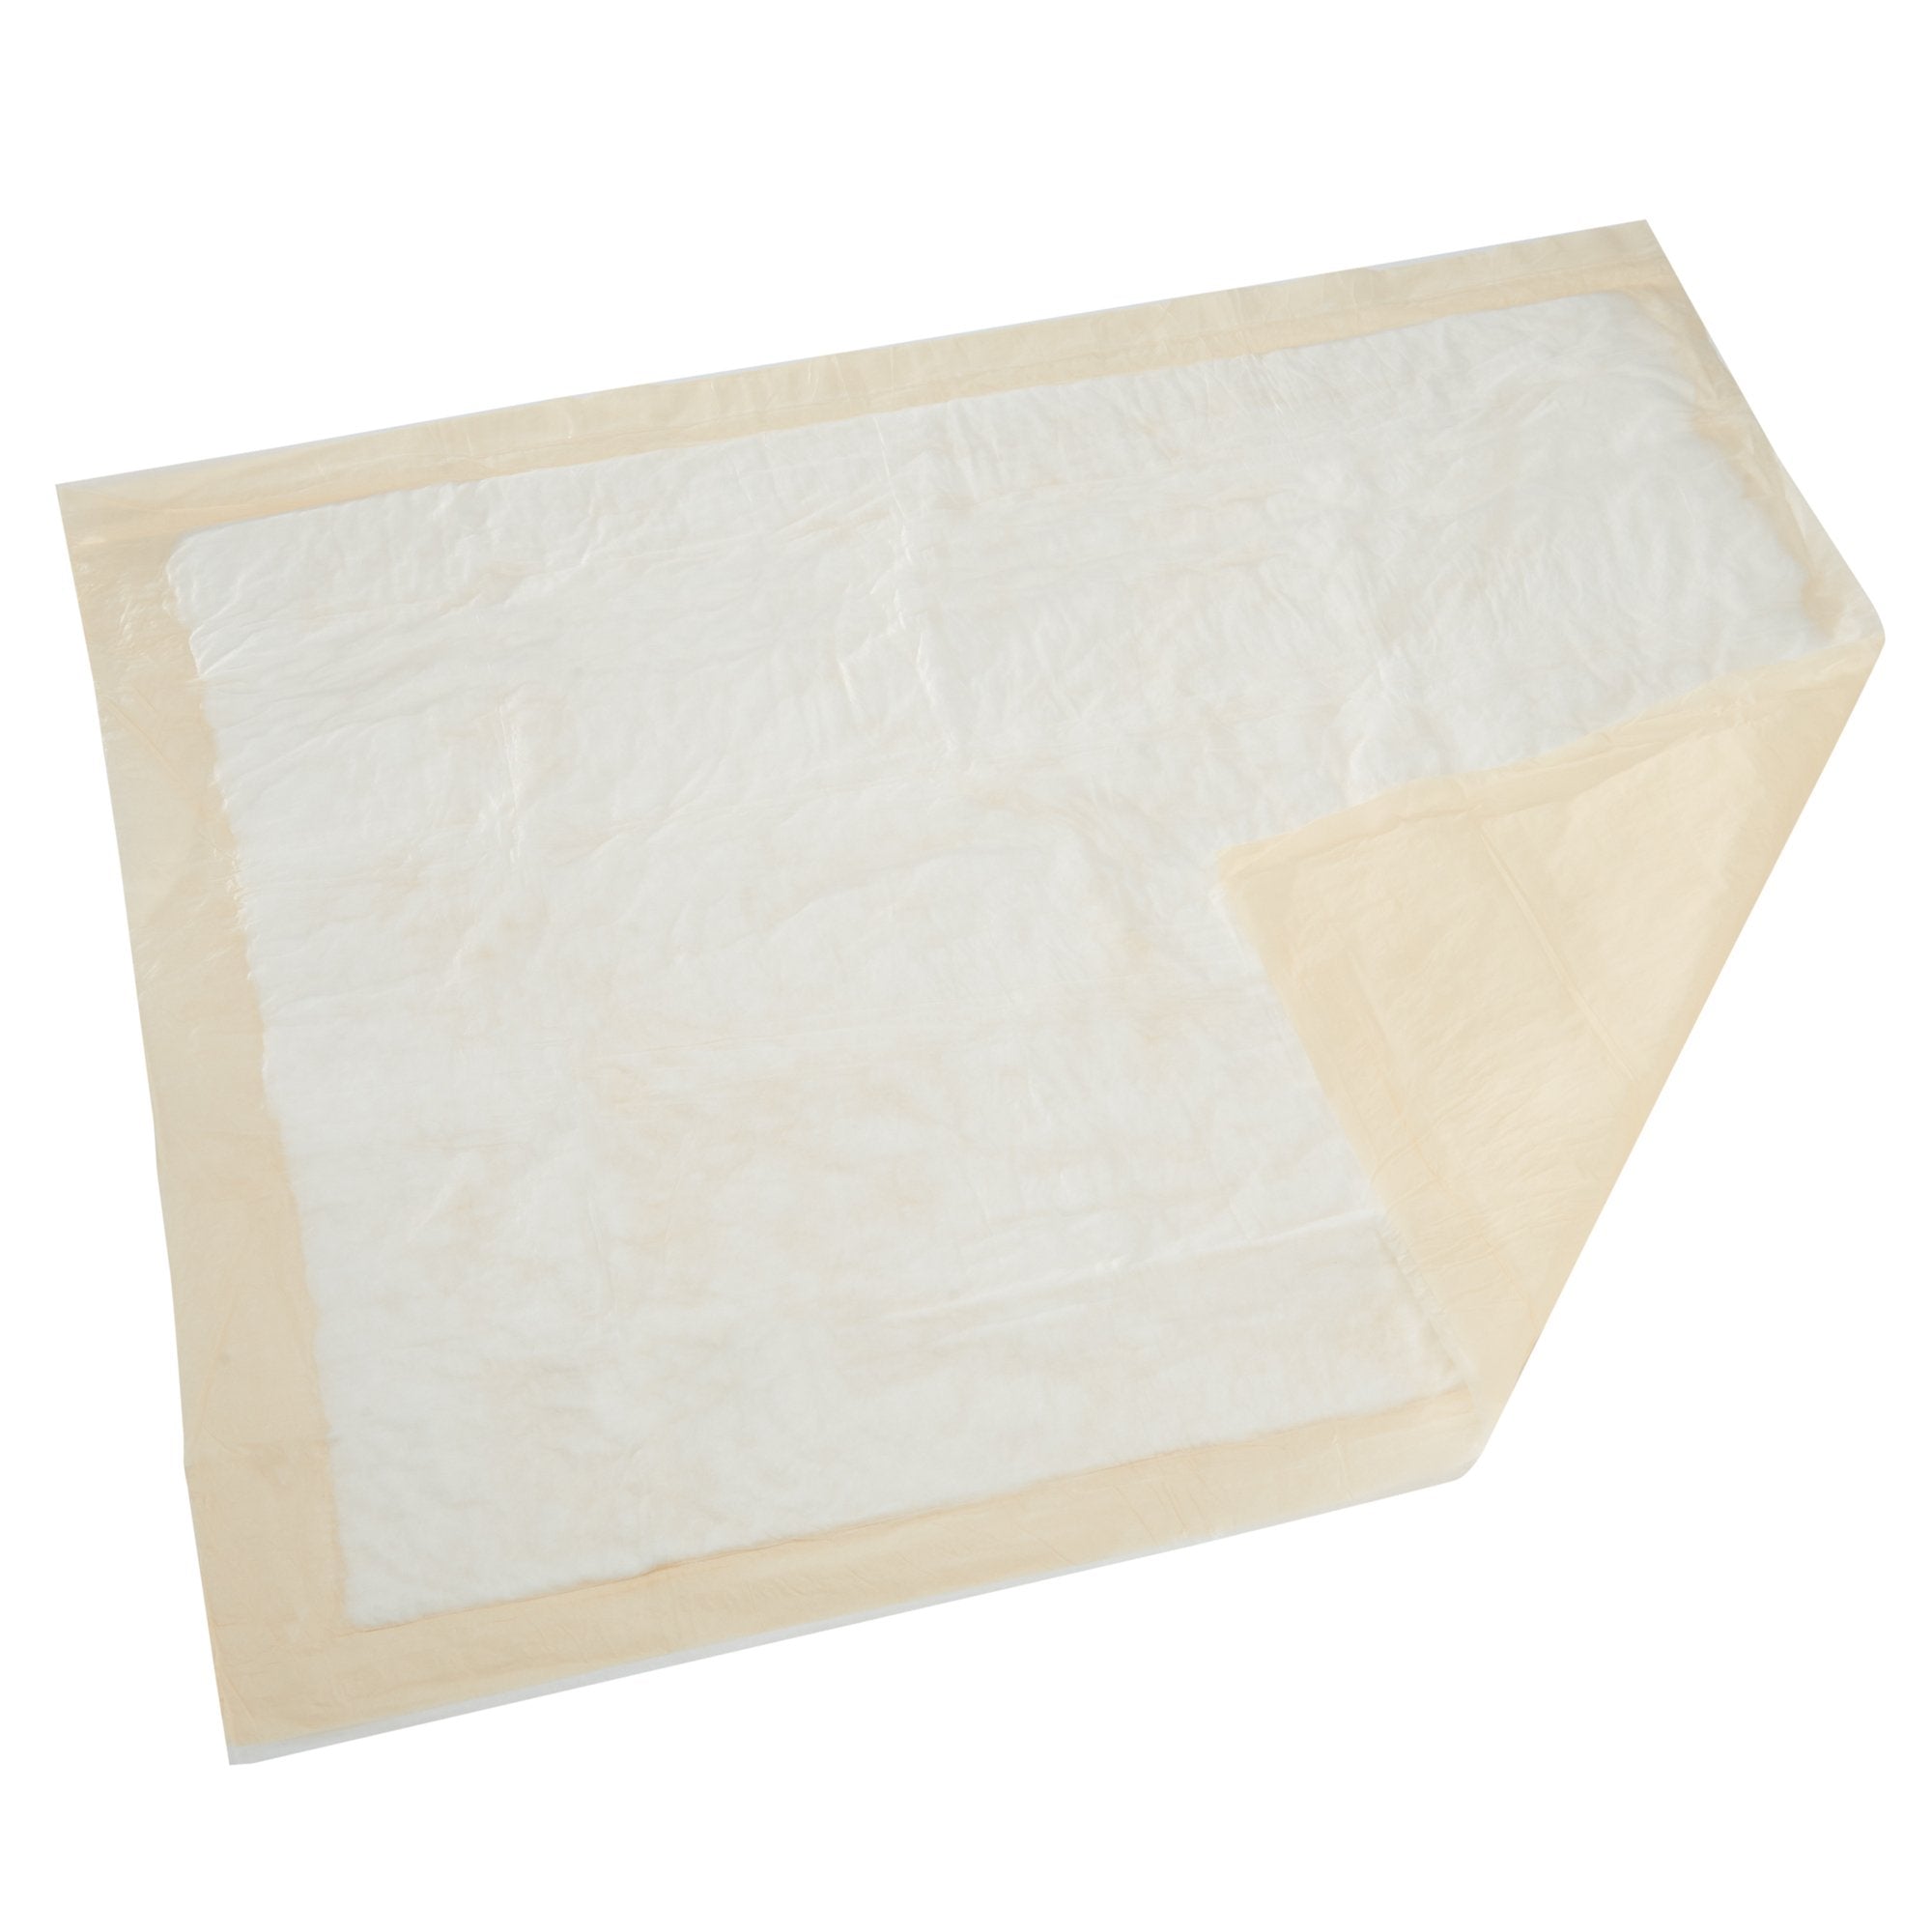 Disposable Underpad Attends Care Night Preserver 30 X 36 Inch Cellulose / Polymer Heavy Absorbency